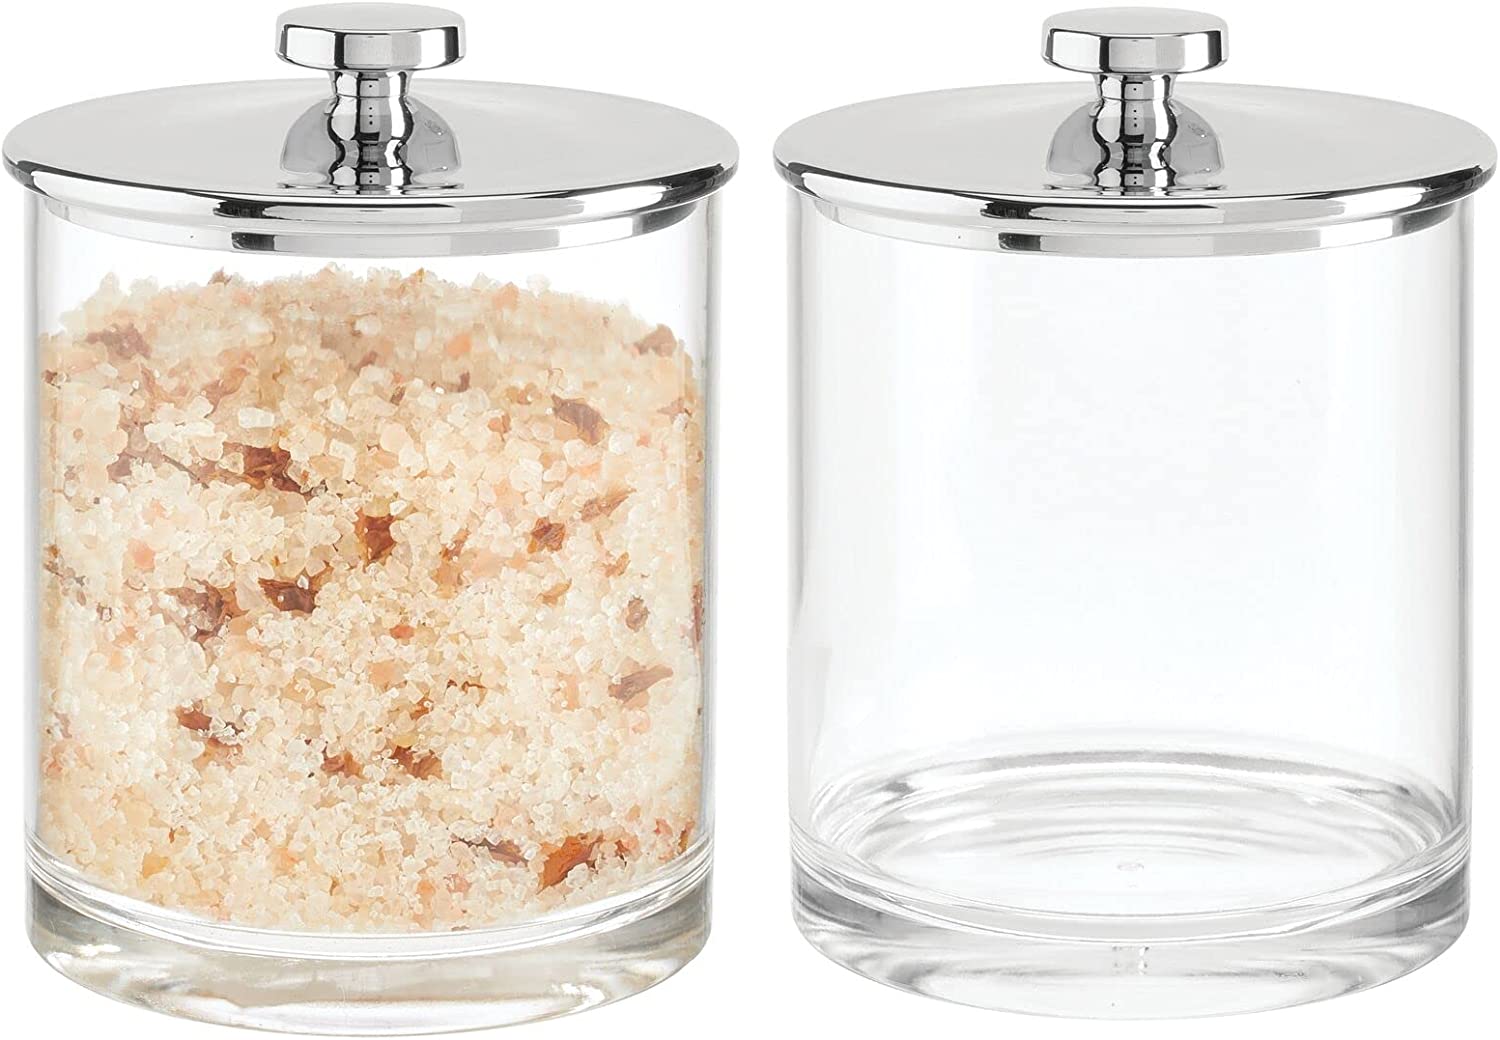 mDesign Shatter-Resistant Plastic Bathroom Canisters, 2-Pack